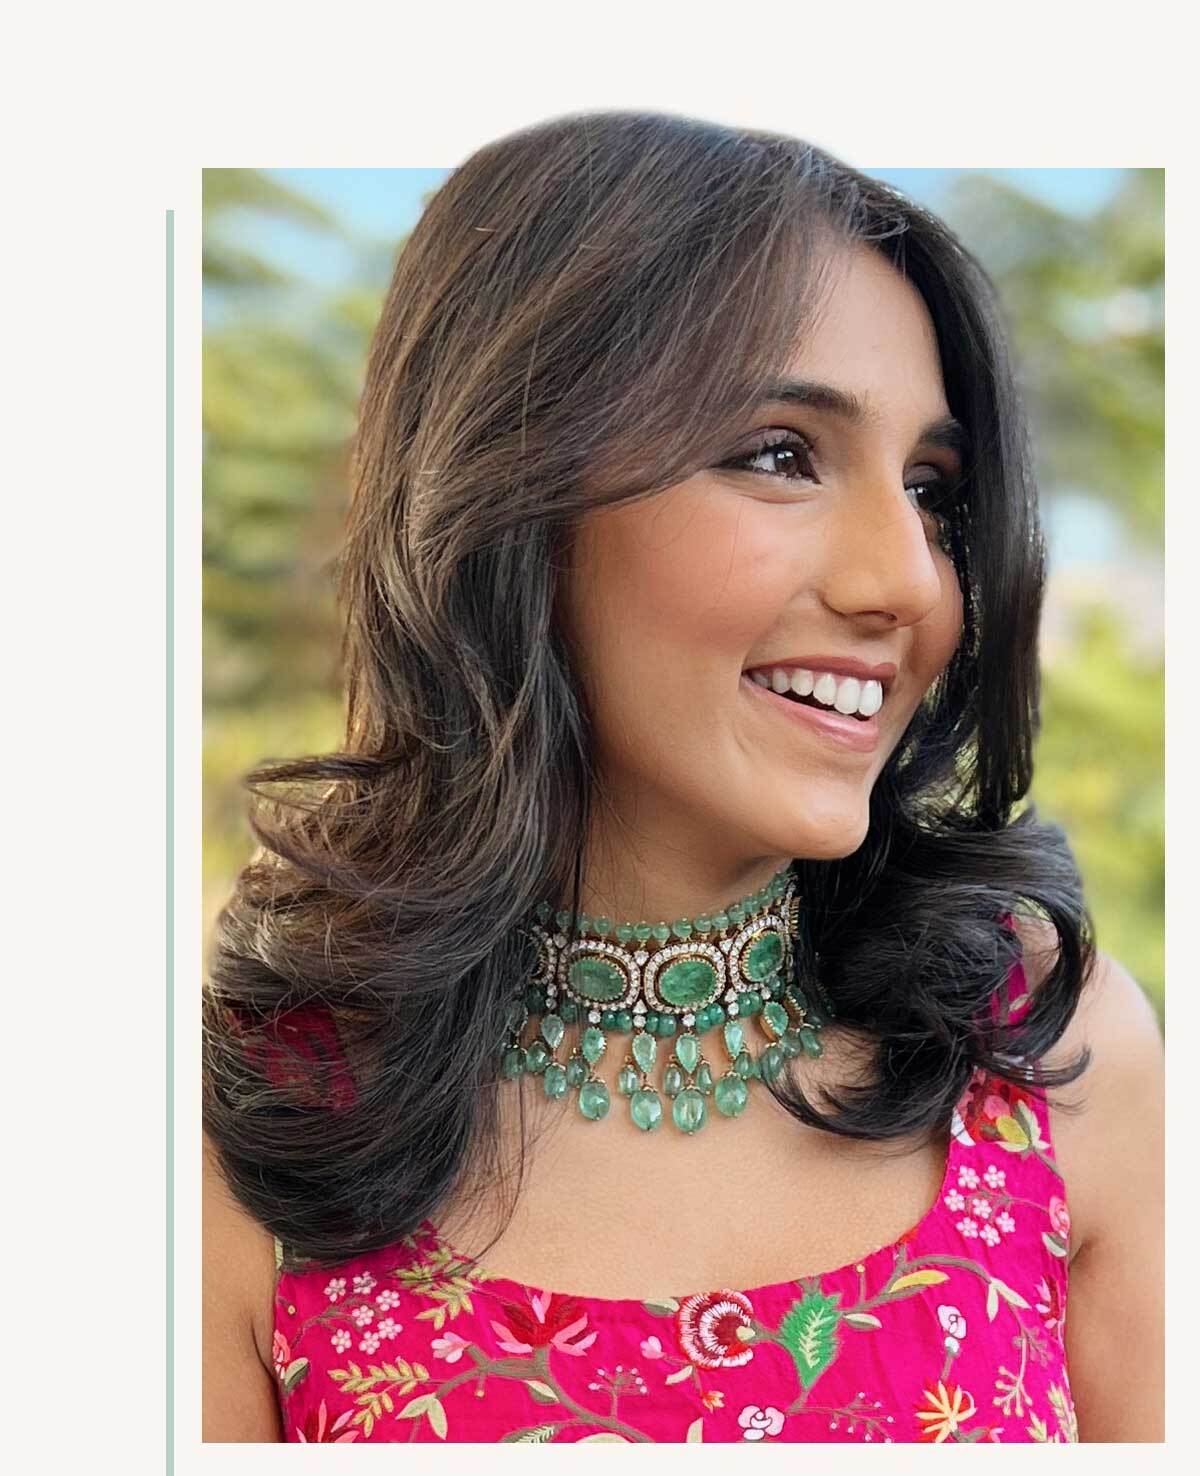 Exquisite Emerald-Encrusted Diamond Choker: Worn by Masoom Minawala with a Fuchsia Pink Outfit